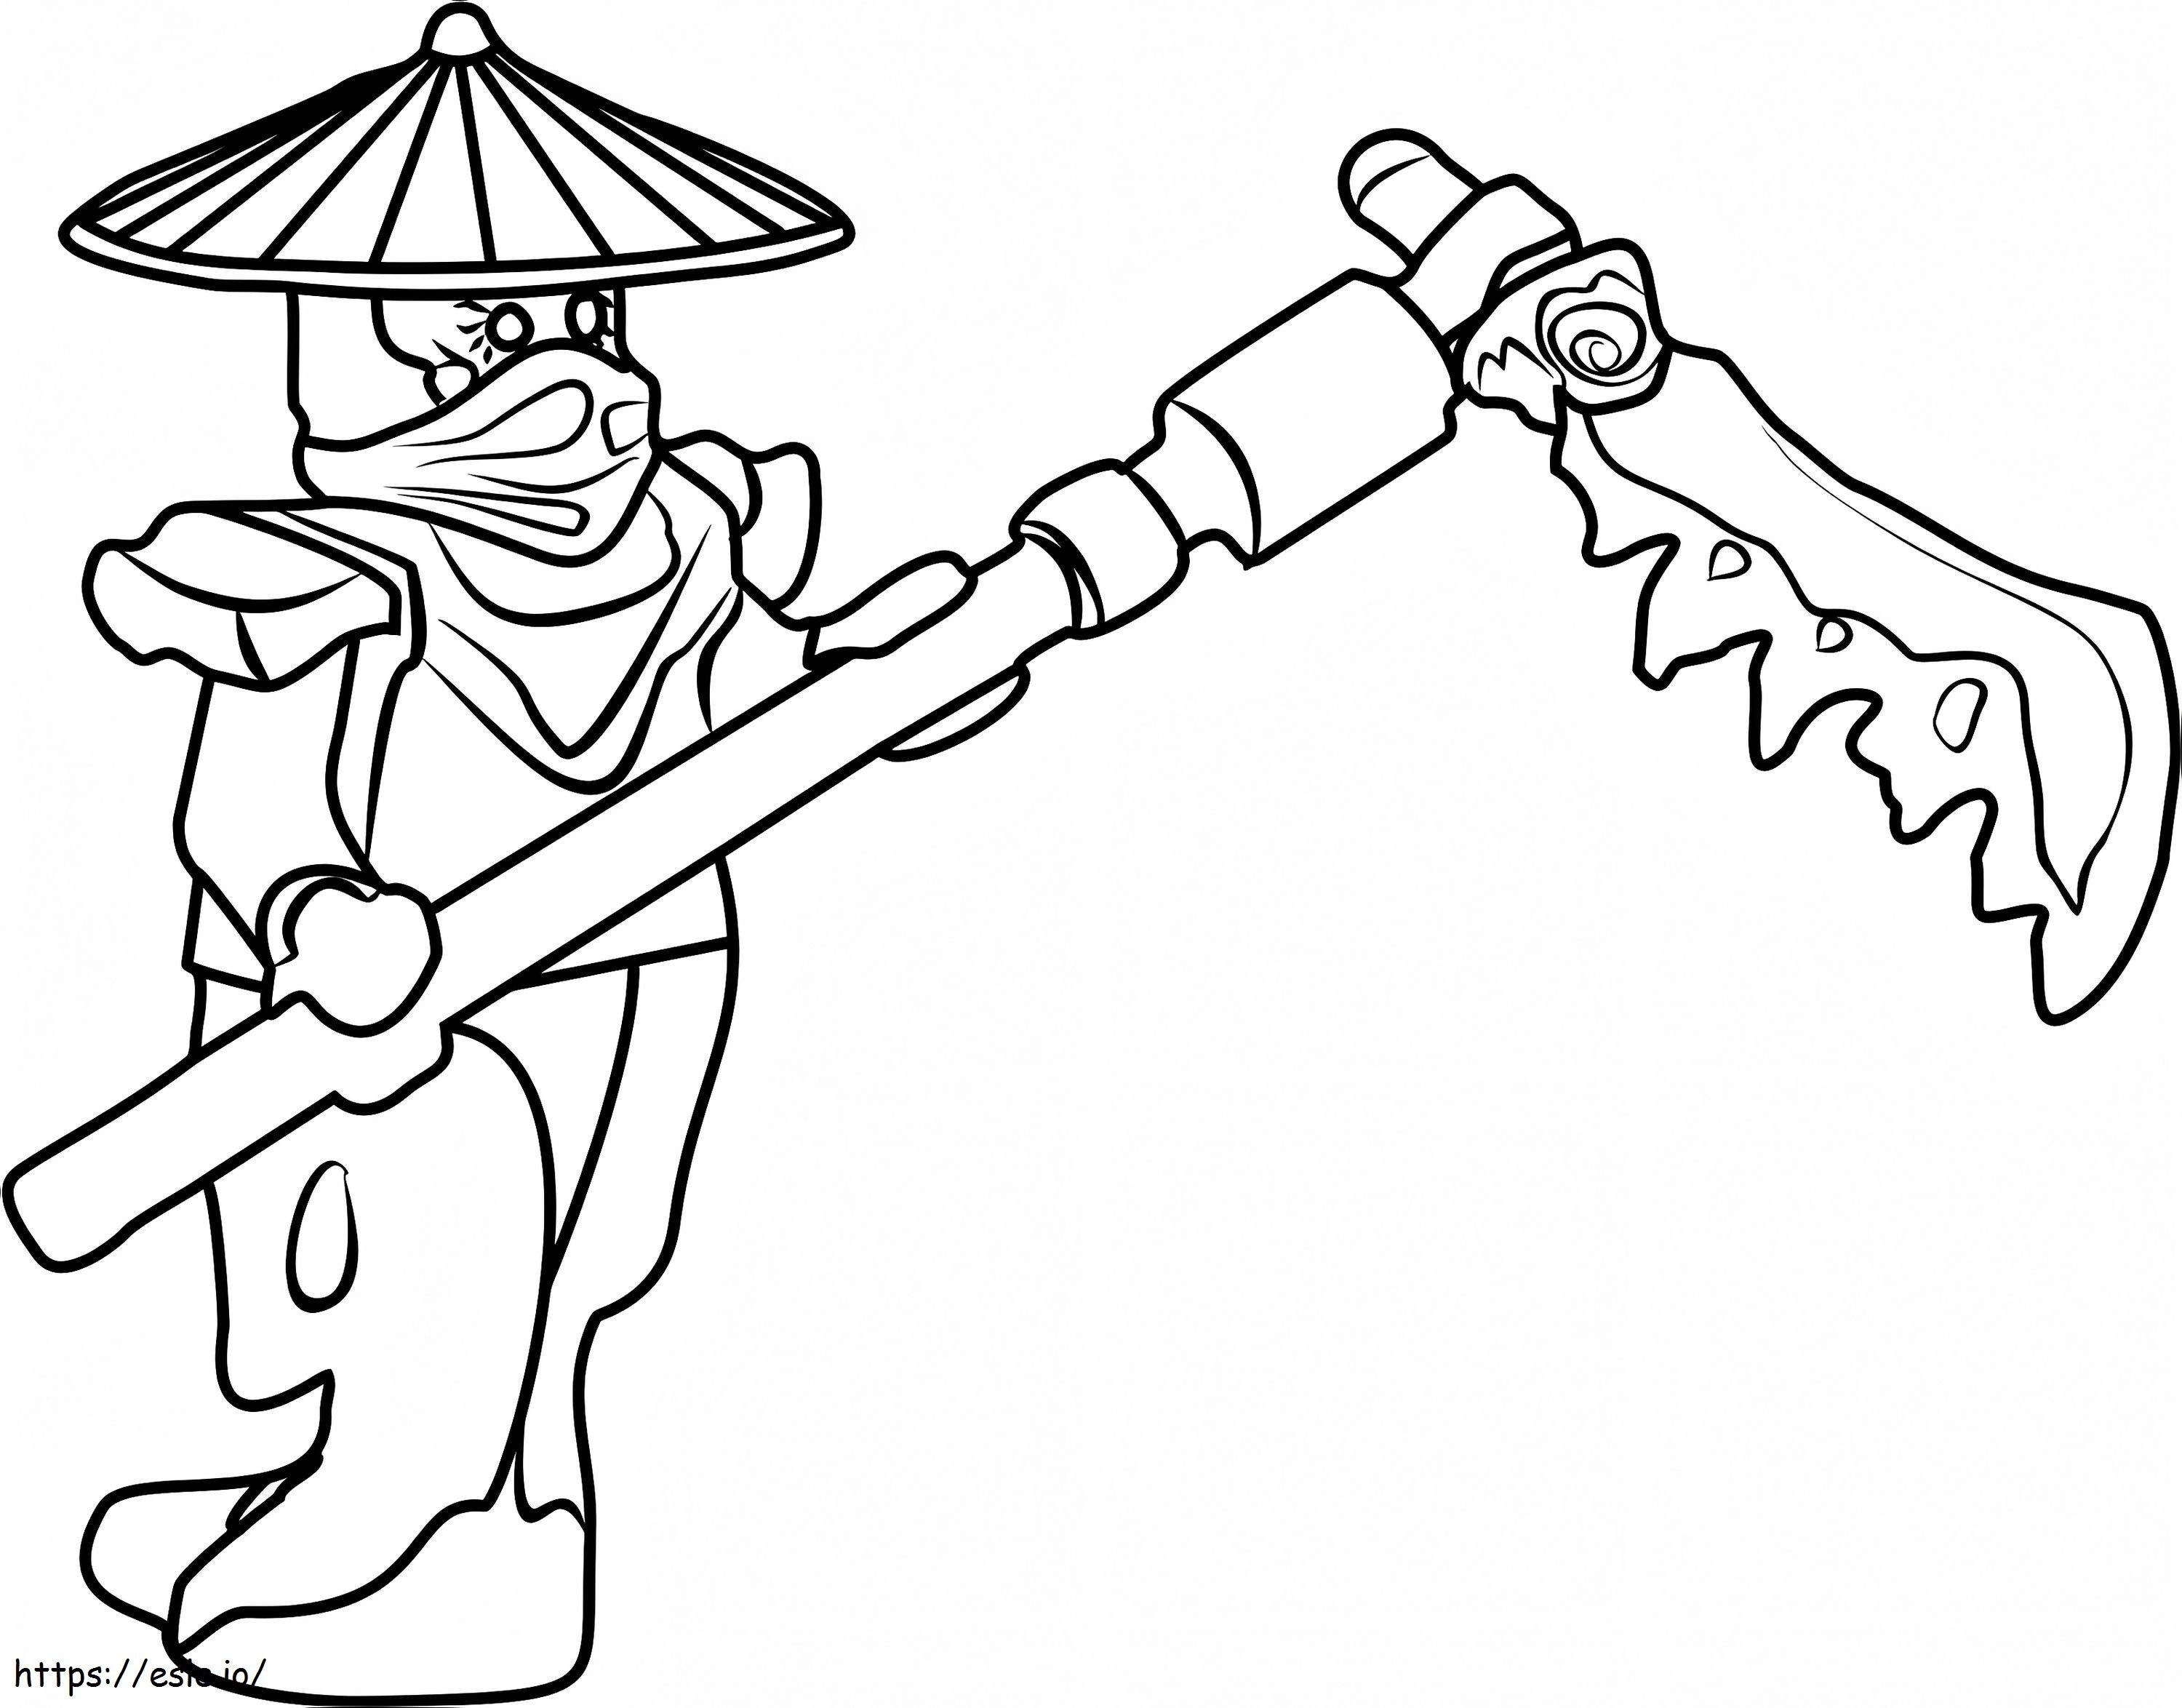 1529722674 14 coloring page